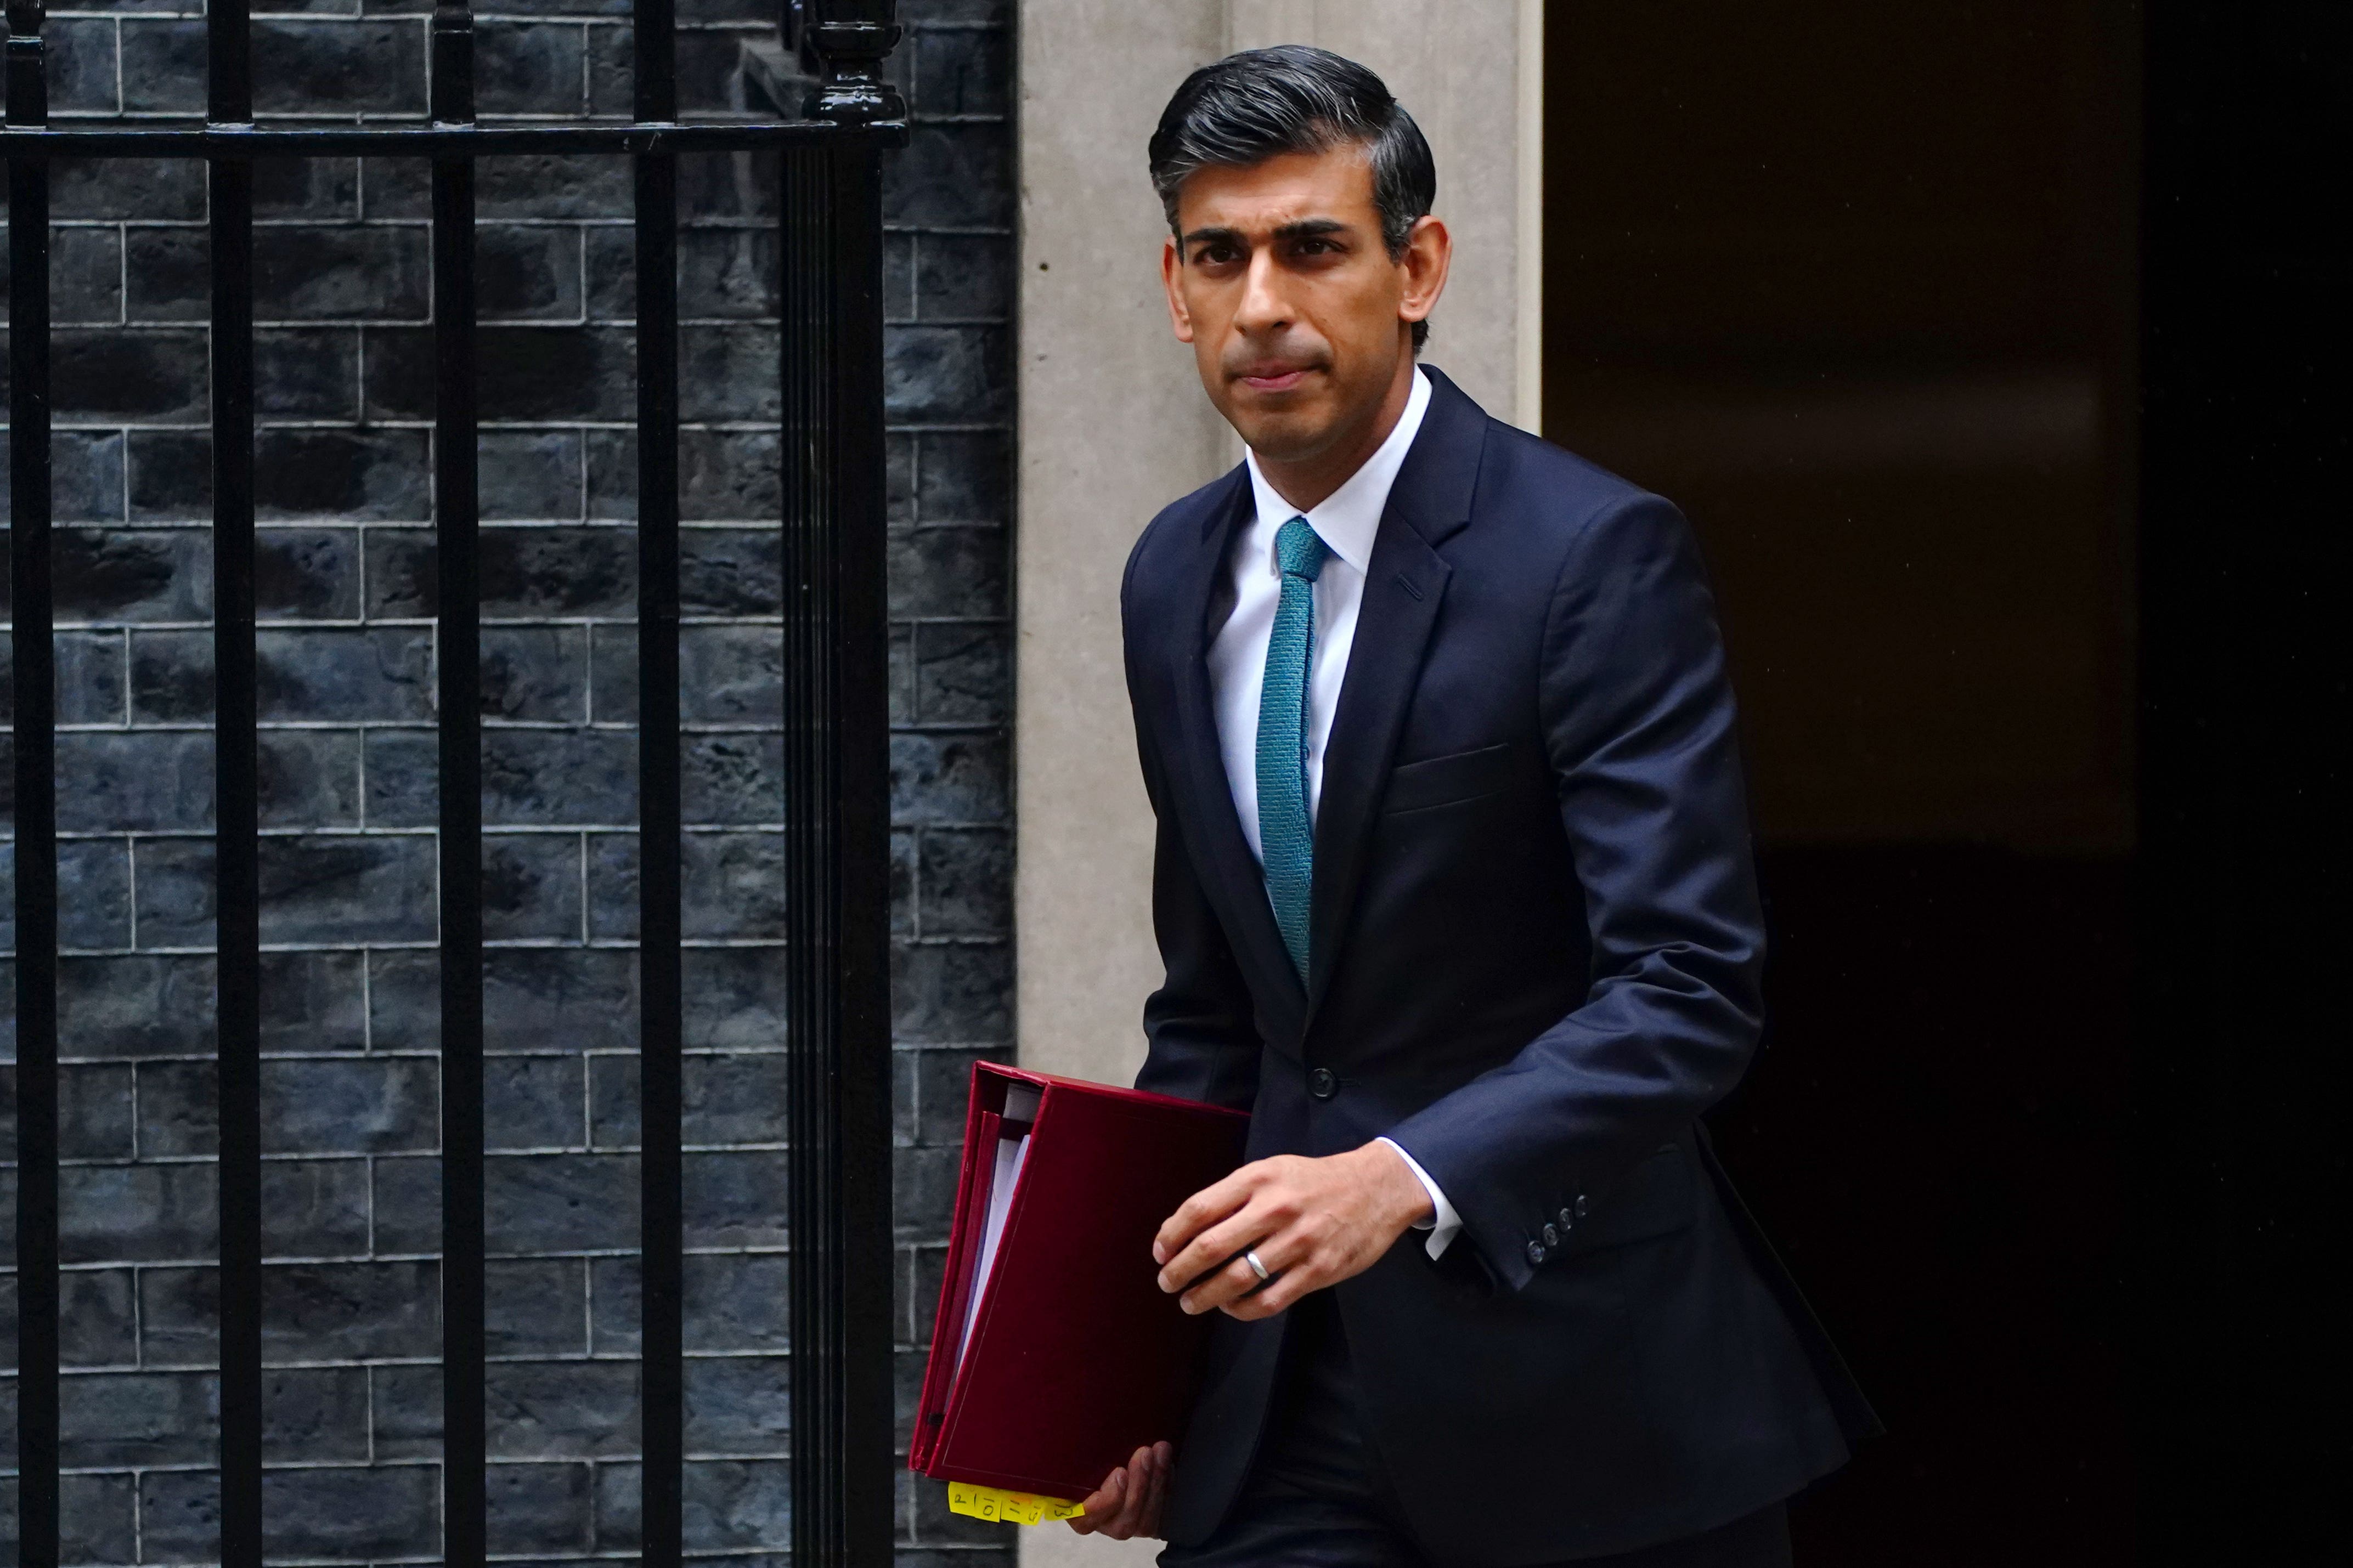 Prime minister, first lord of the Treasury and now Britain’s chief financial regulator? Rishi Sunak seems to want the job